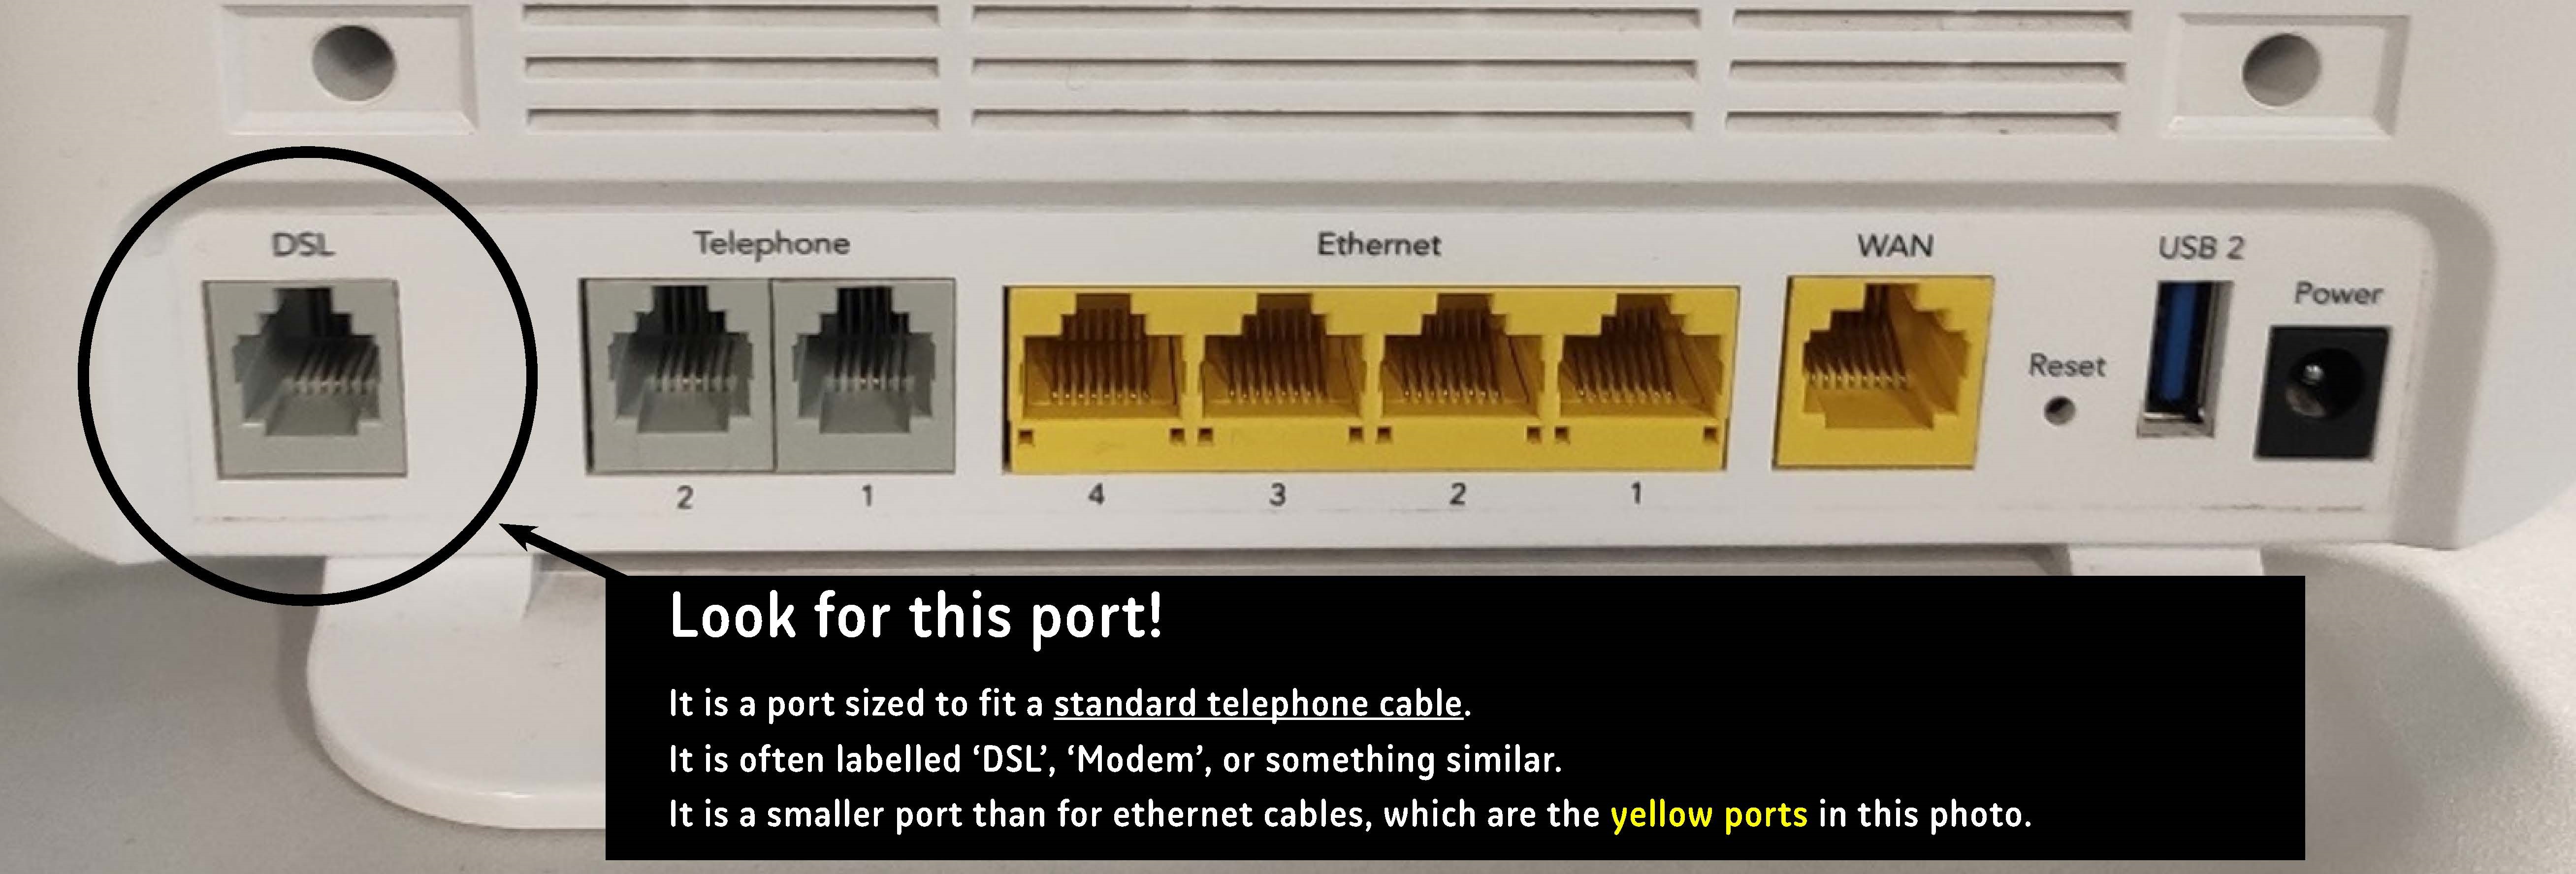 Look for a port the size of a standard telephone cable. It will be smaller than the other ports on the router, designed for larger, ethernet cables.